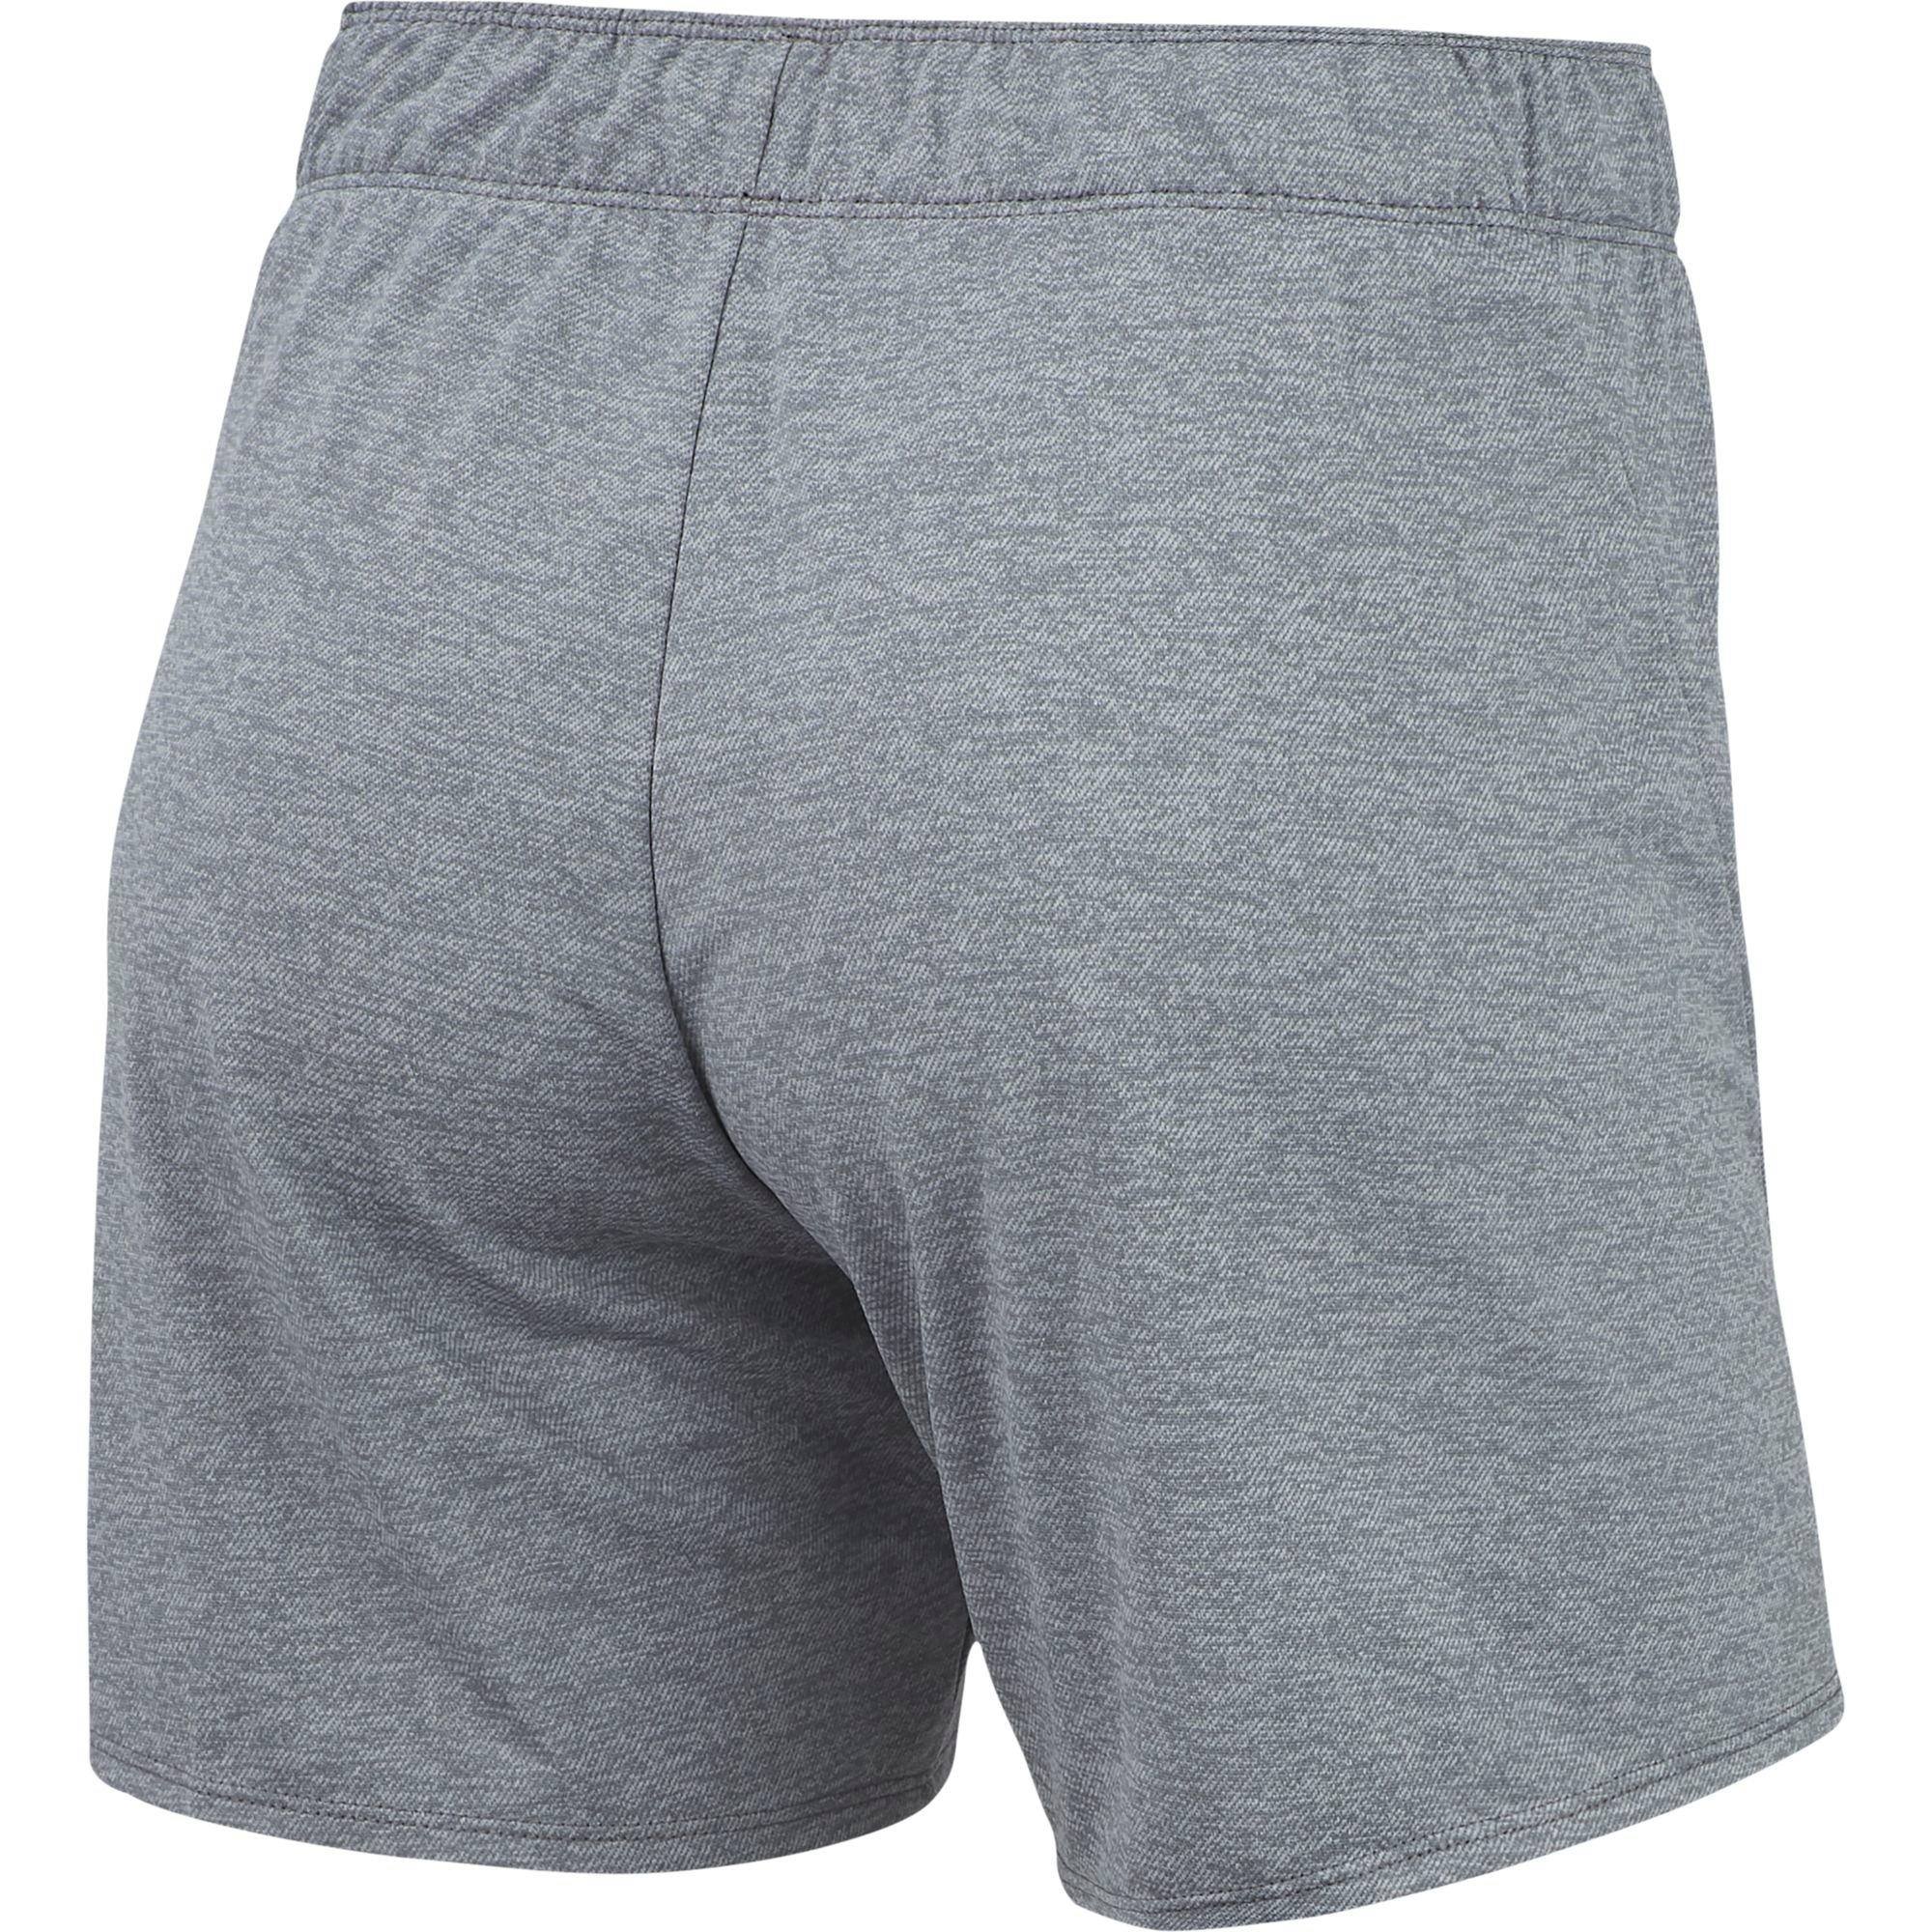 nike team authentic dry attack shorts